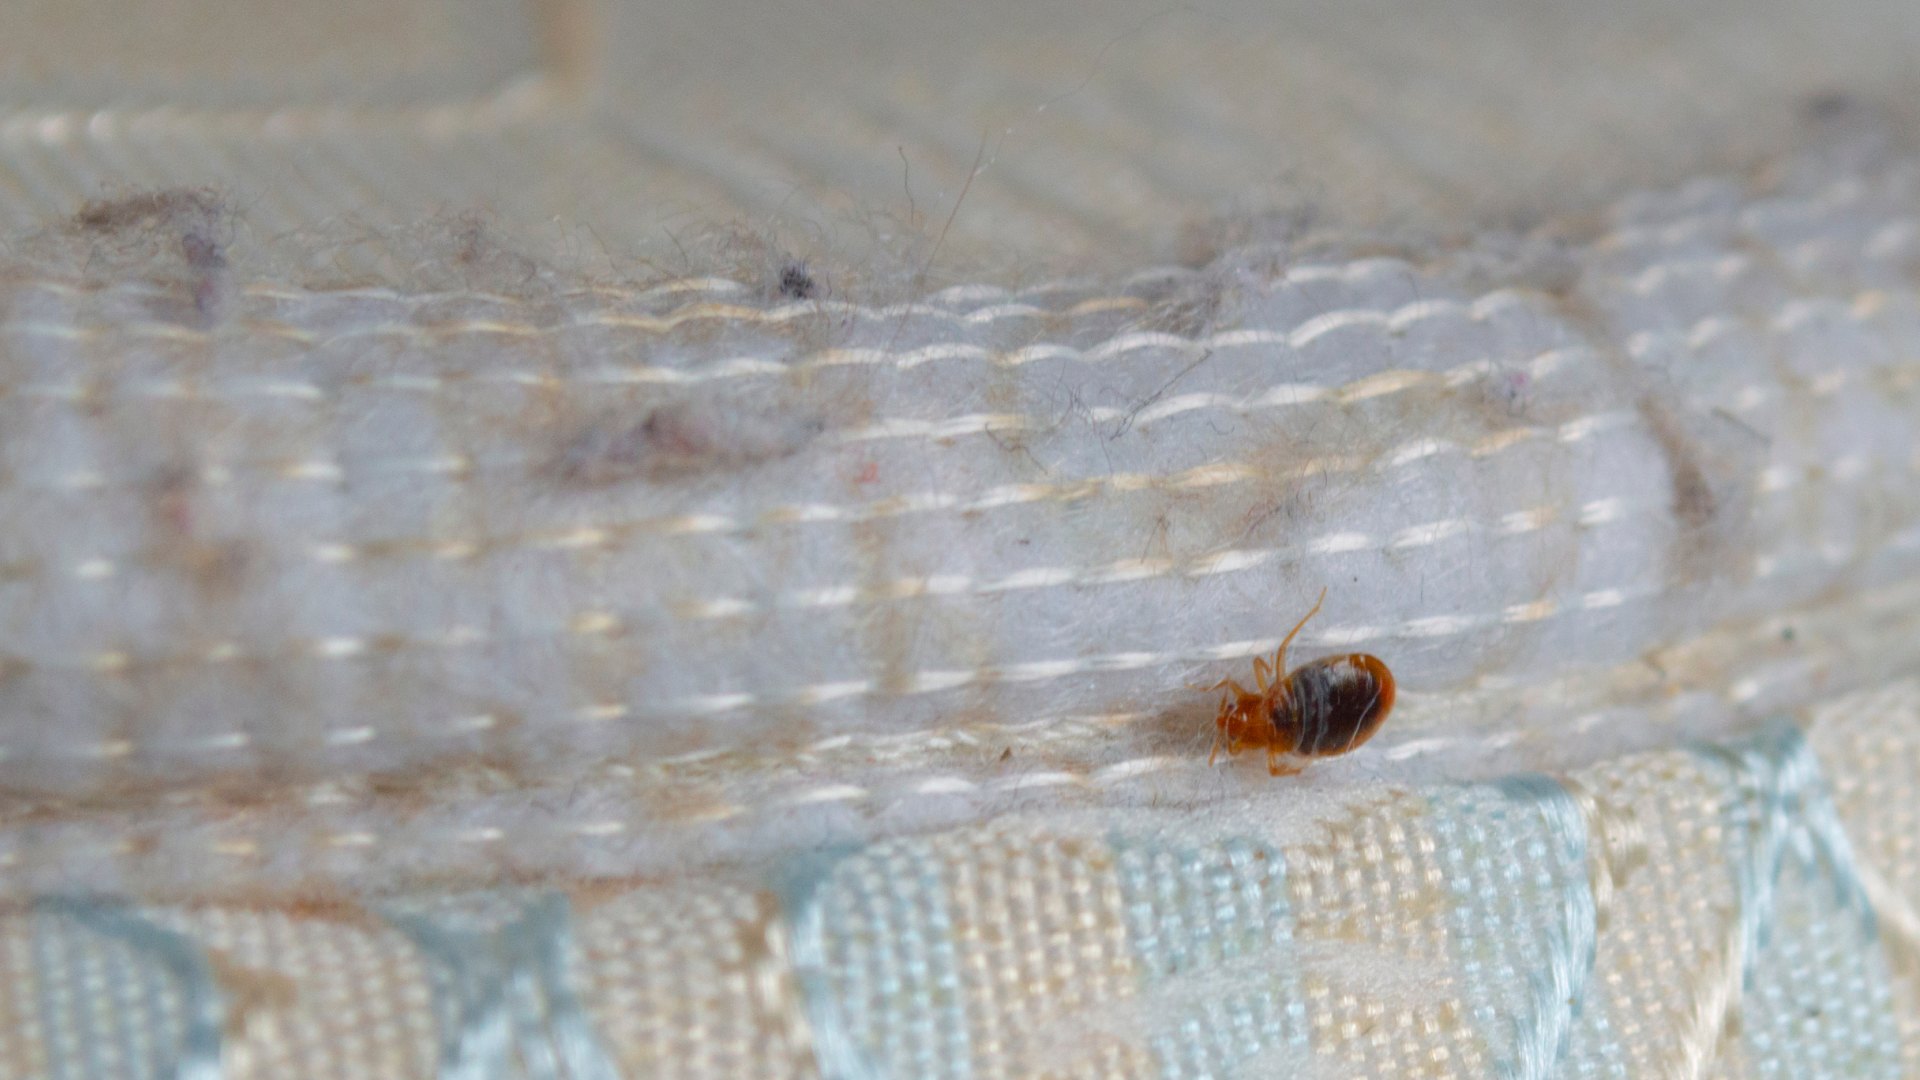 An adult bedbug clings to the edge of a mattress in Ventura CA